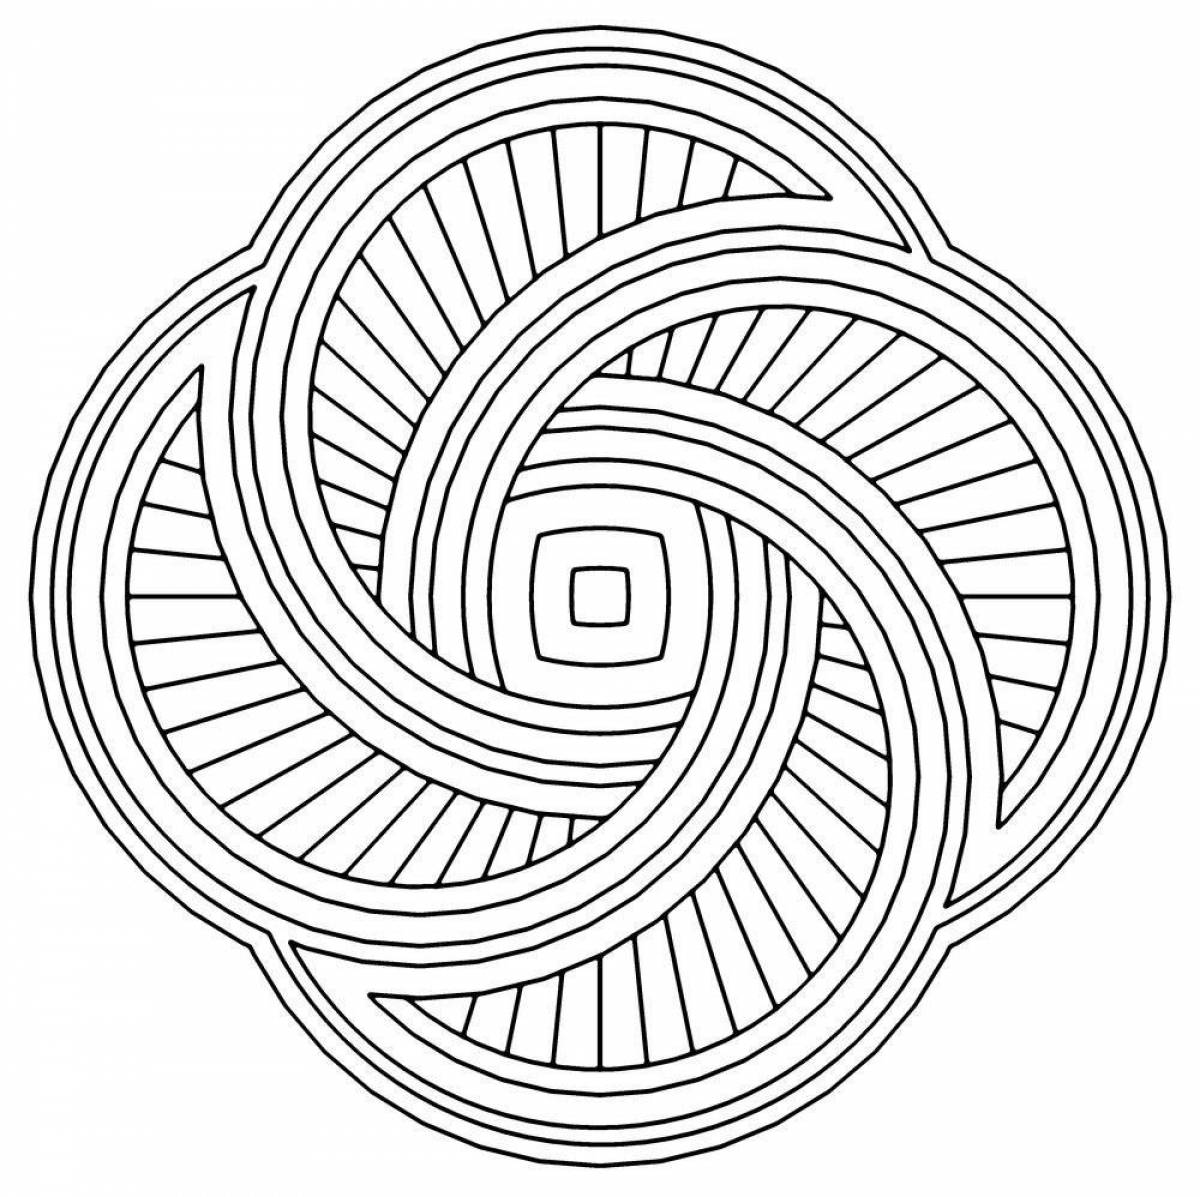 Amazing spiral coloring book